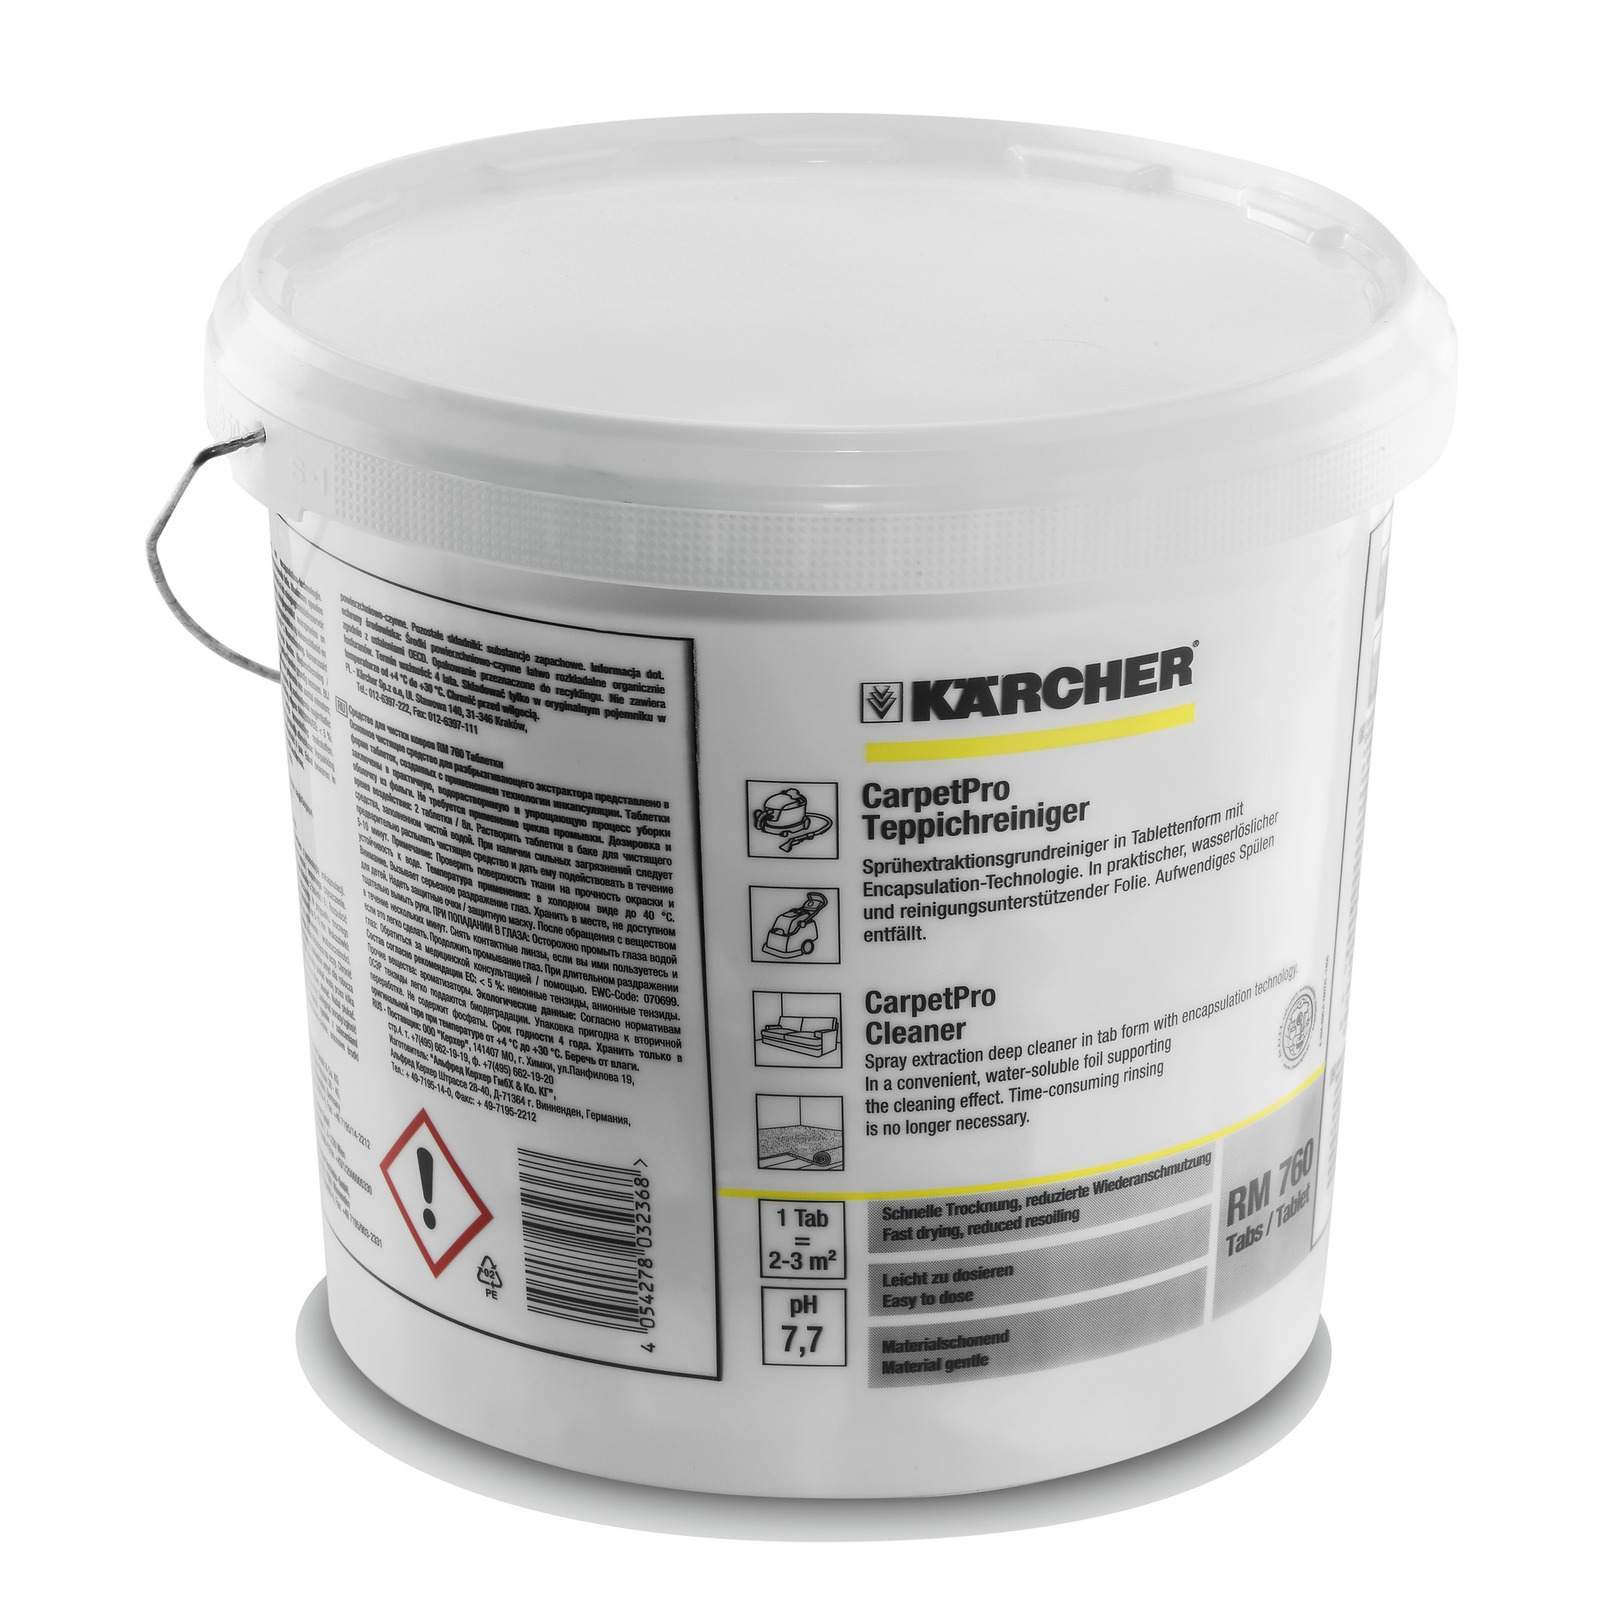 latitude Post-impressionism debt CarpetPro Cleaner Tablets RM760 200pk | Cleaning and Care Products | Karcher  Australia